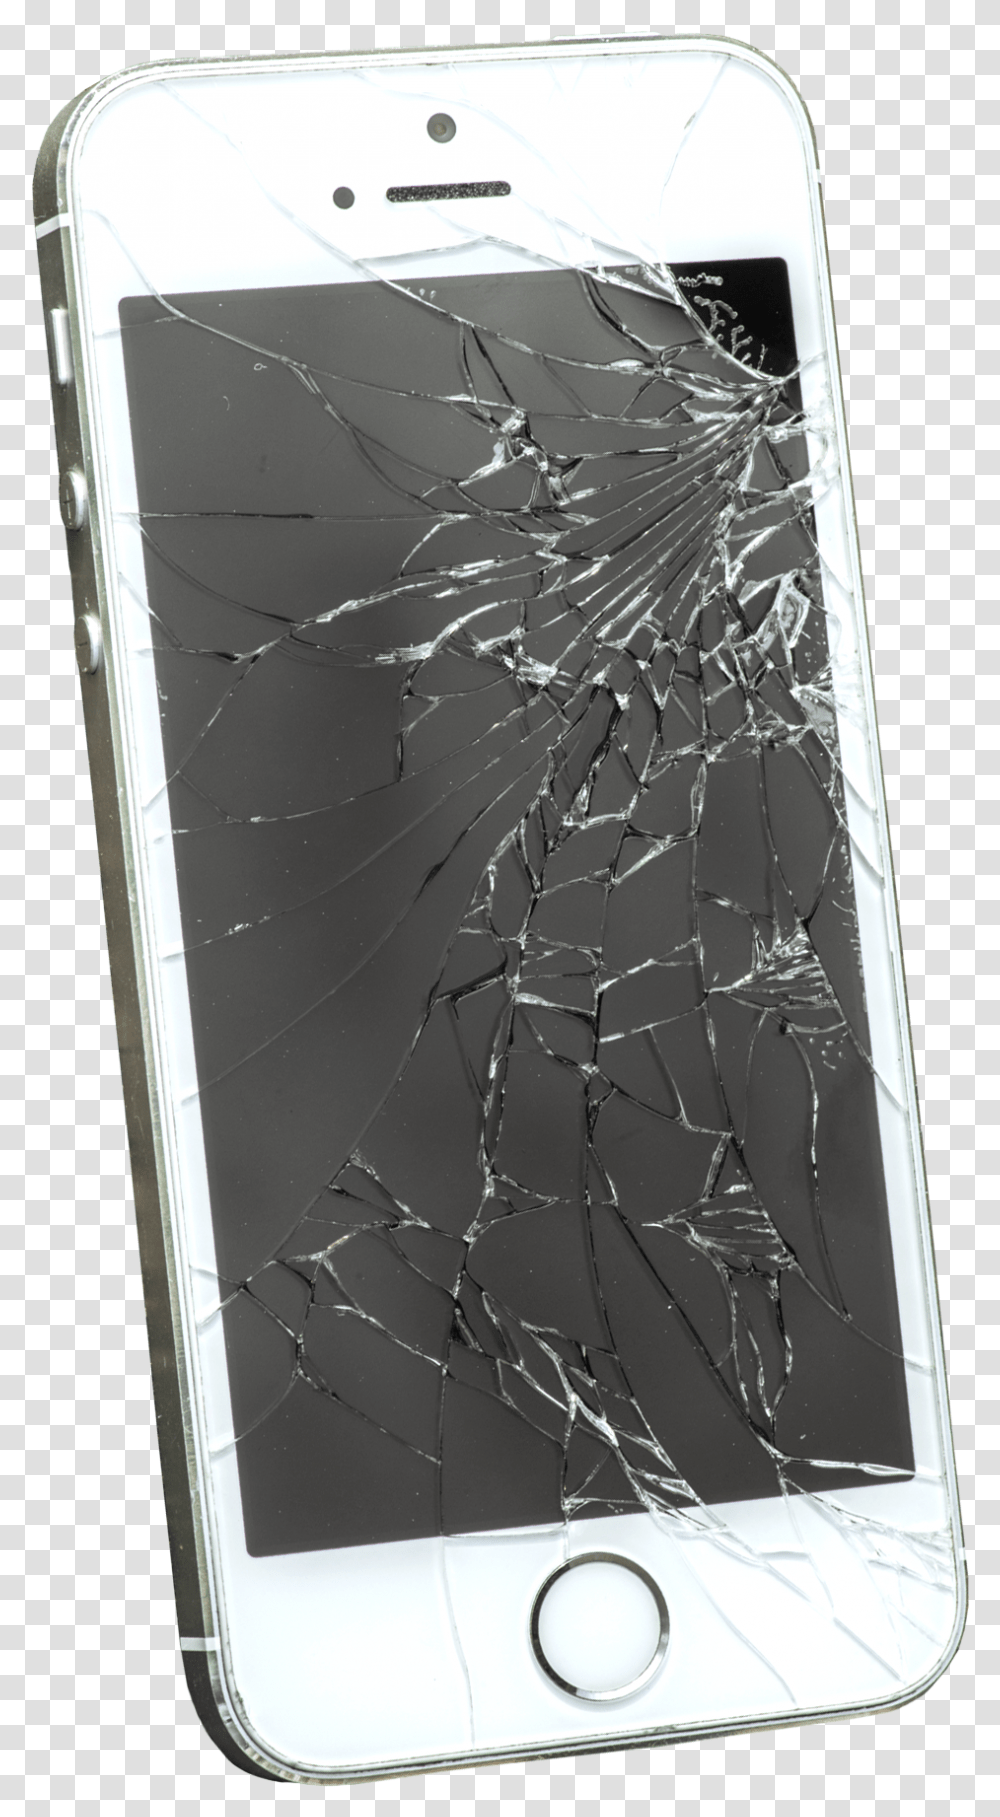 Mobile Device Repair Archives Phone Crack, Mobile Phone, Electronics, Cell Phone, Spider Web Transparent Png